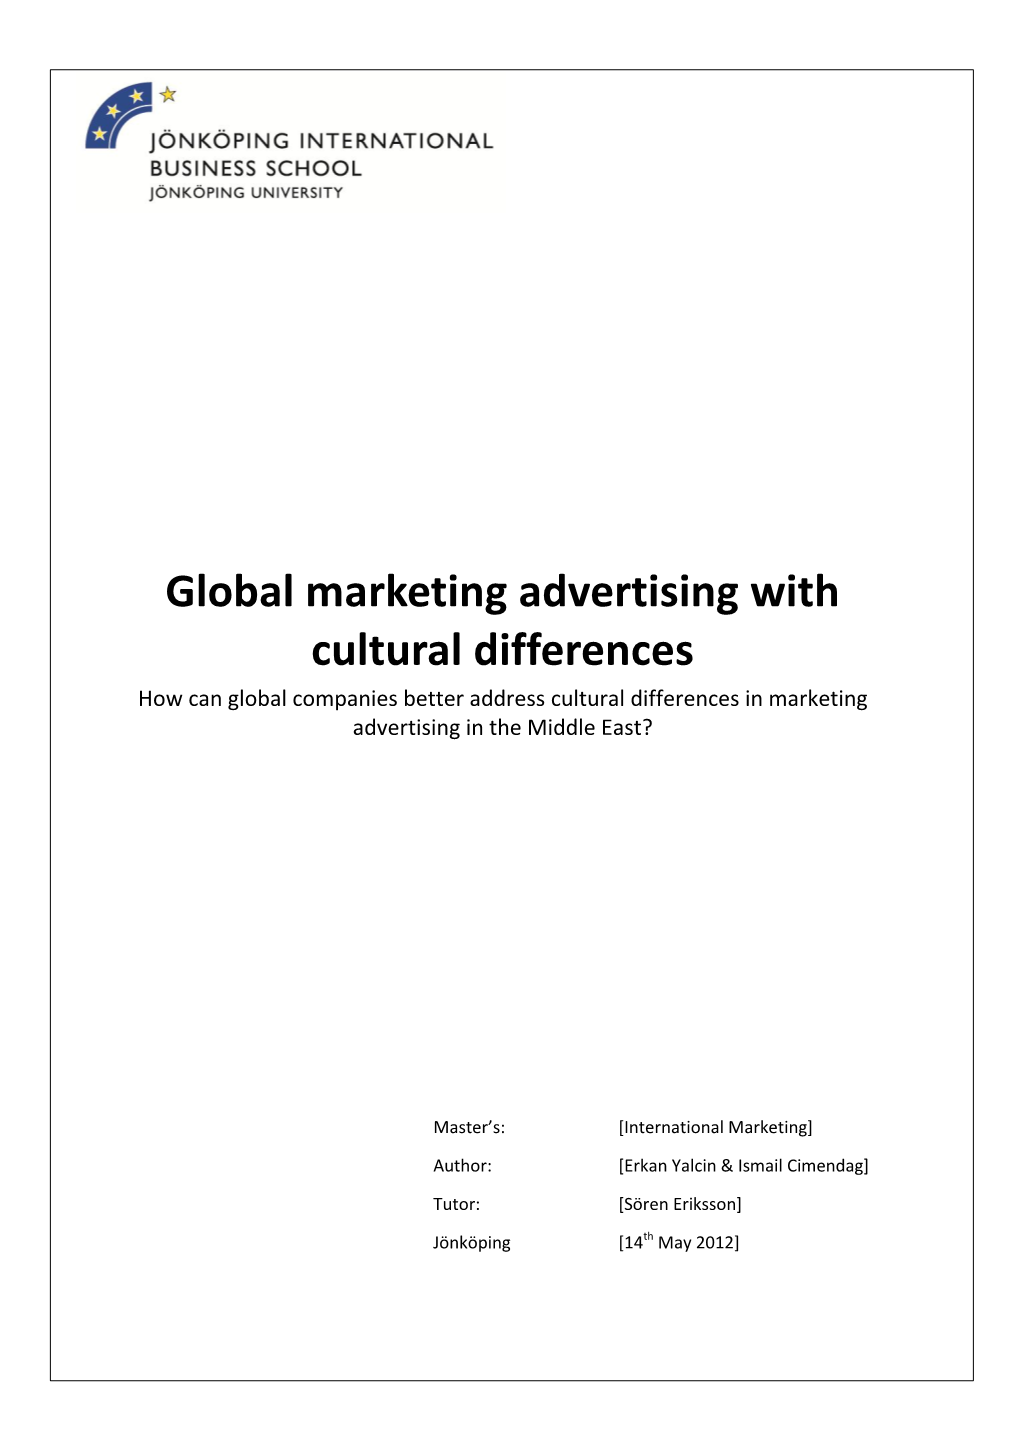 Global Marketing Advertising with Cultural Differences How Can Global Companies Better Address Cultural Differences in Marketing Advertising in the Middle East?